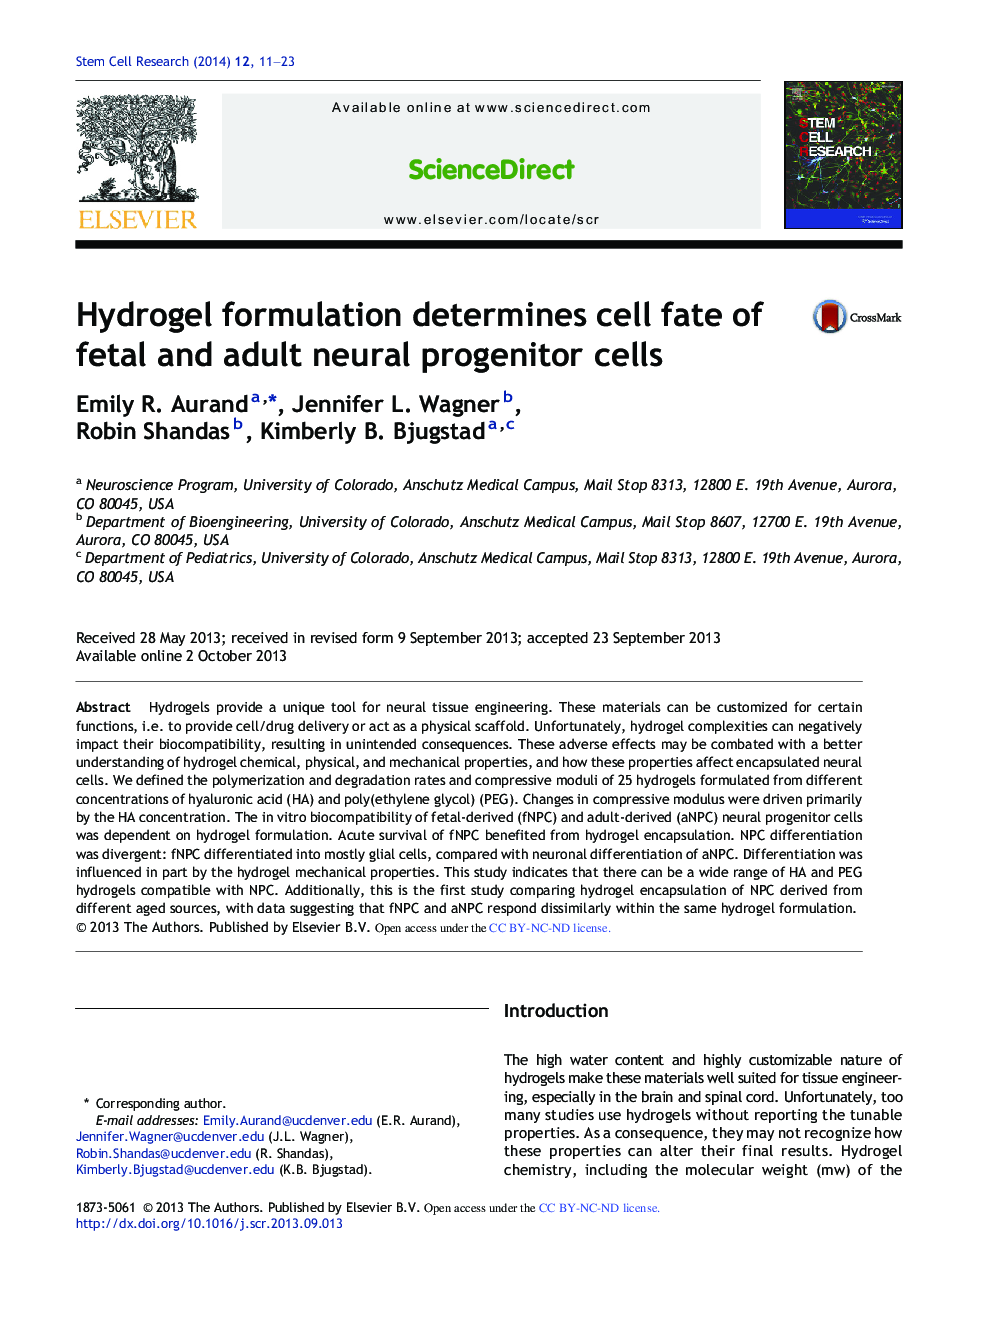 Hydrogel formulation determines cell fate of fetal and adult neural progenitor cells